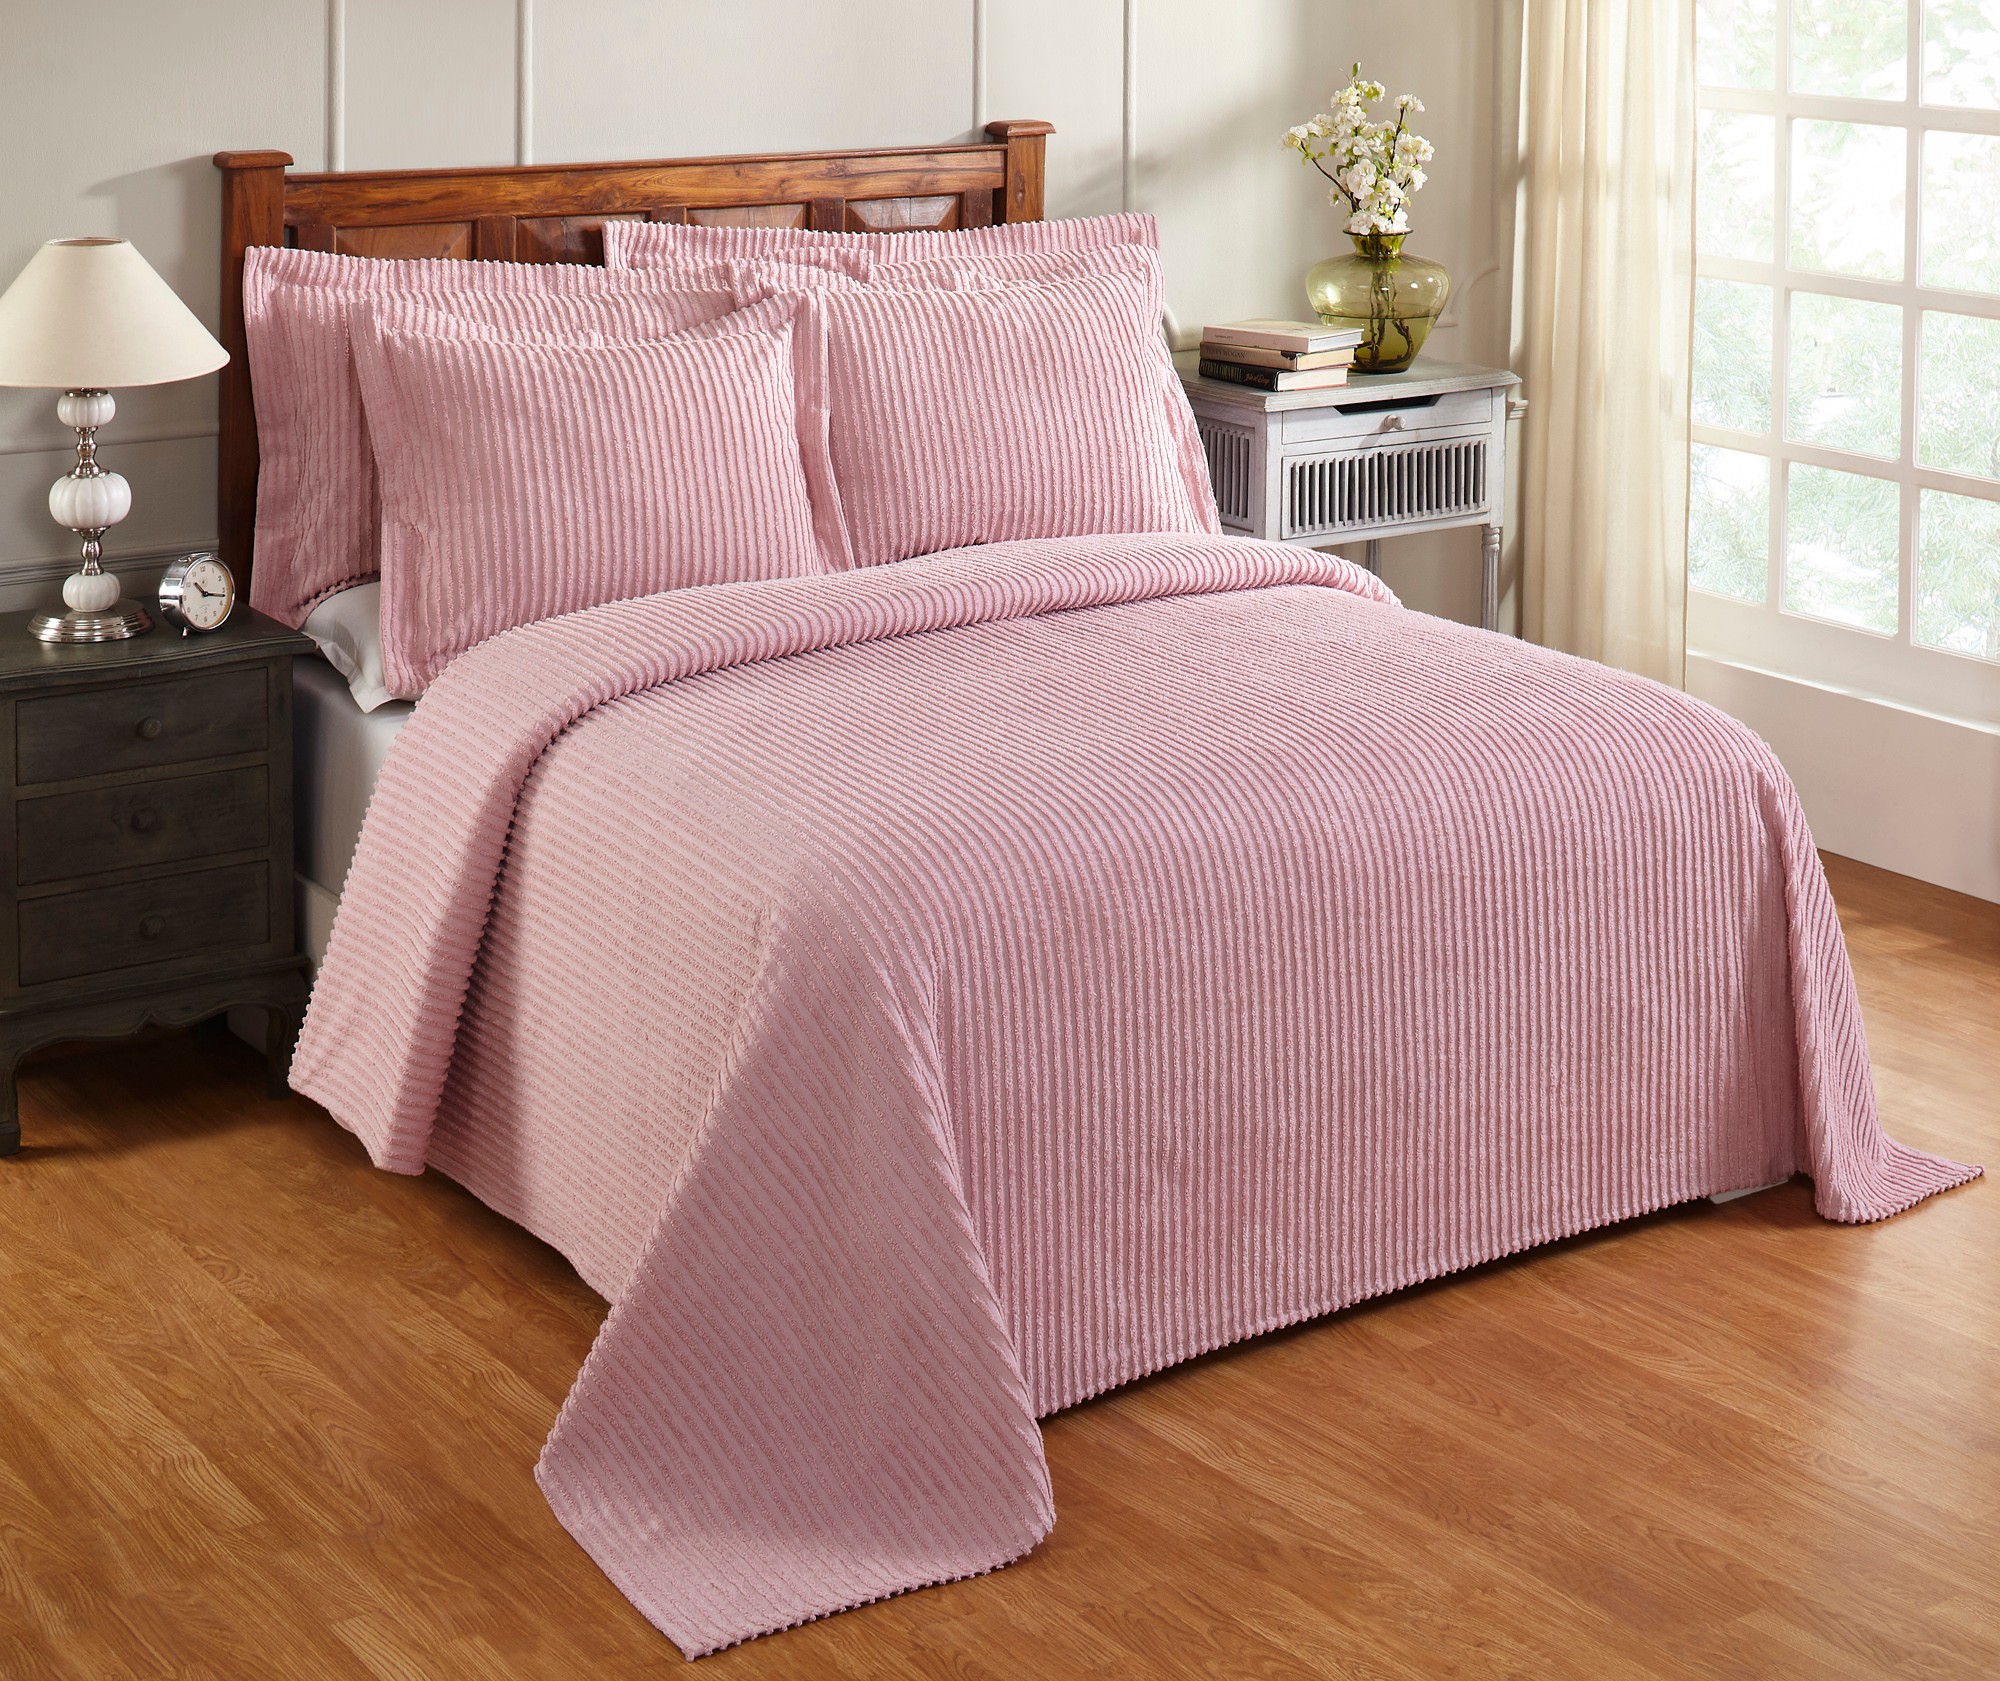 Better Trends Jullian Stripe Design 100% Cotton for All Ages  Full/Double Bedspread - Pink - image 1 of 6